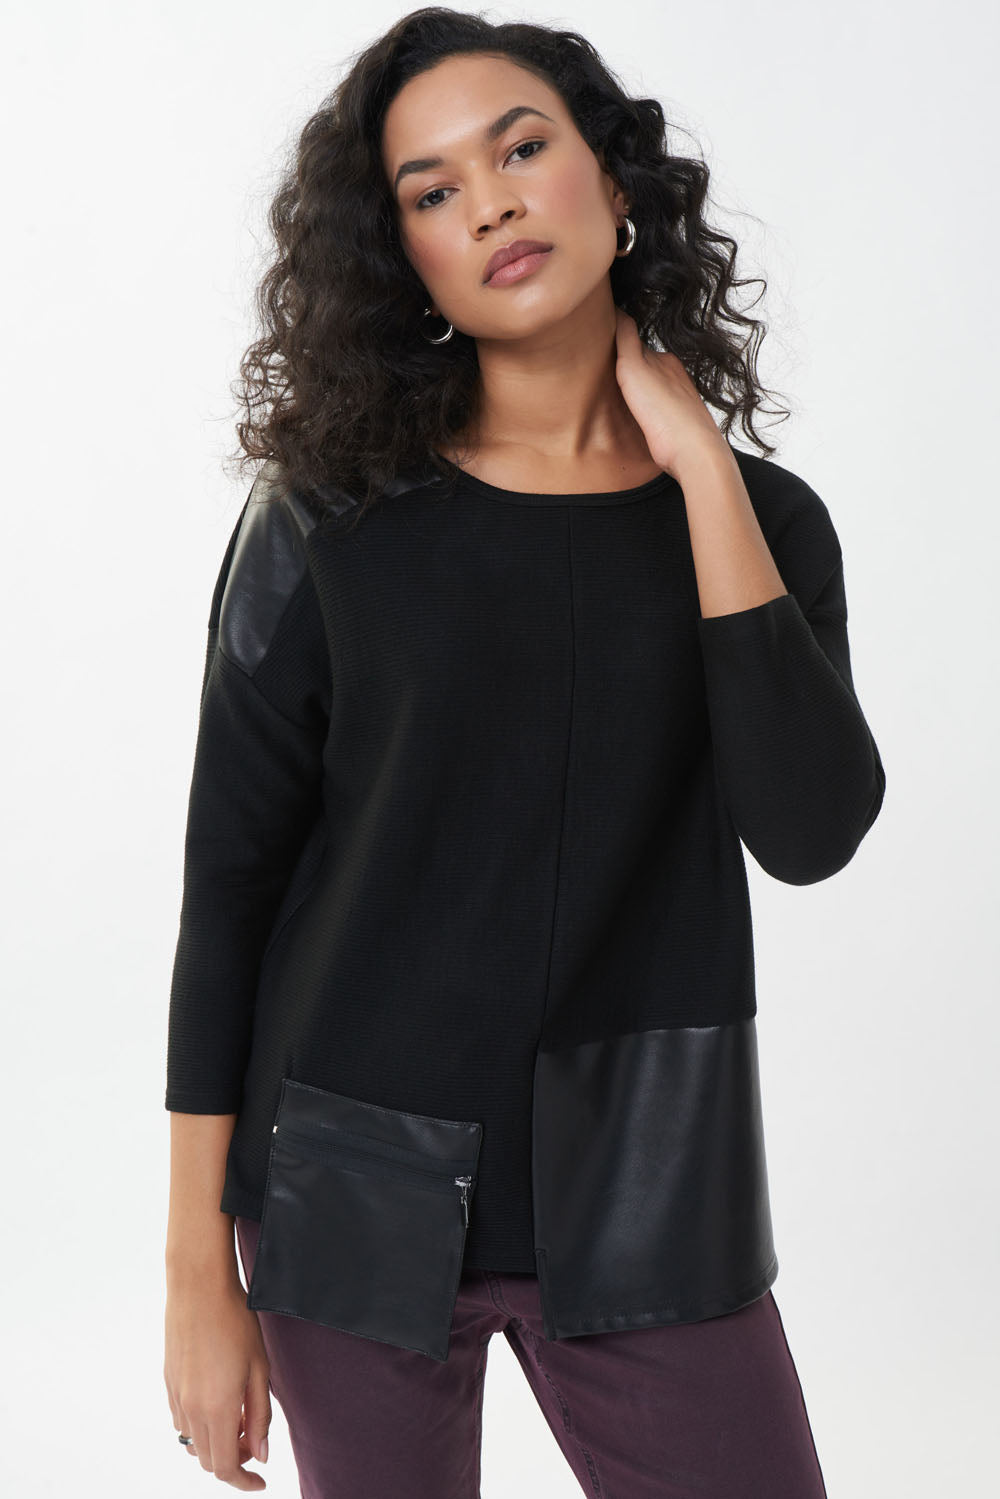 Joseph Ribkoff Black Faux Leather Patch Top Style 223025